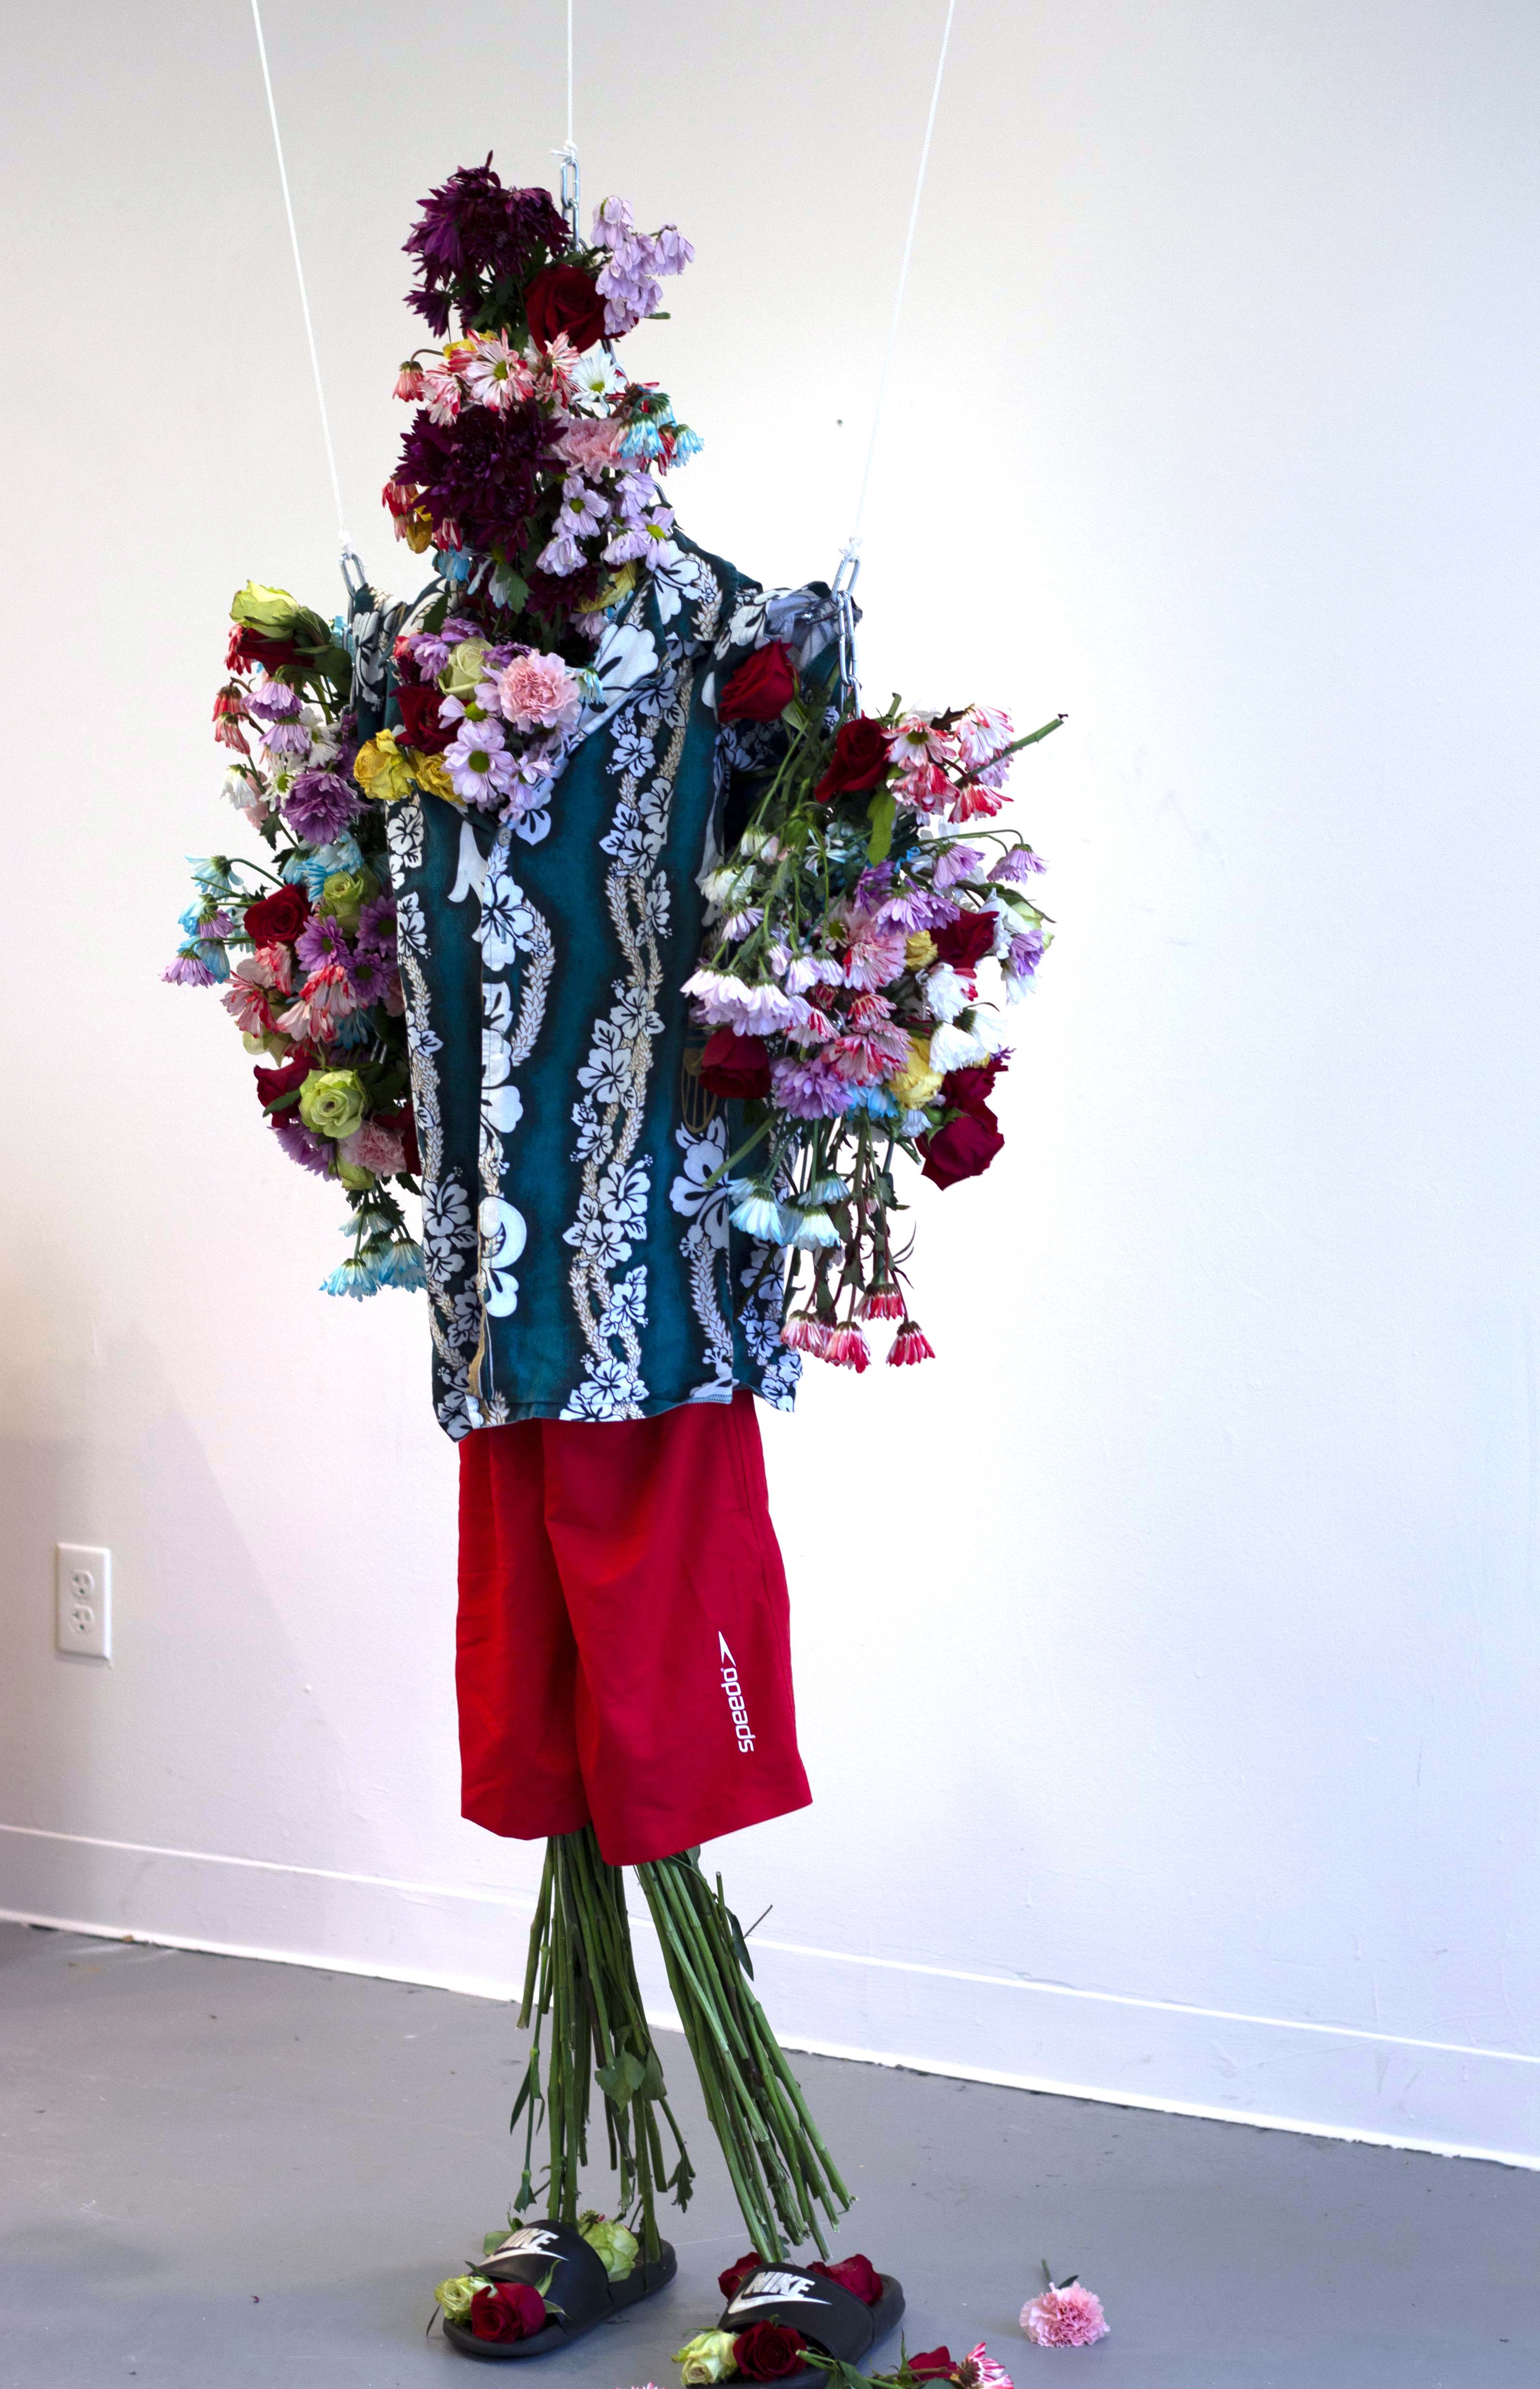 A sculpture made of flowers and clothing.